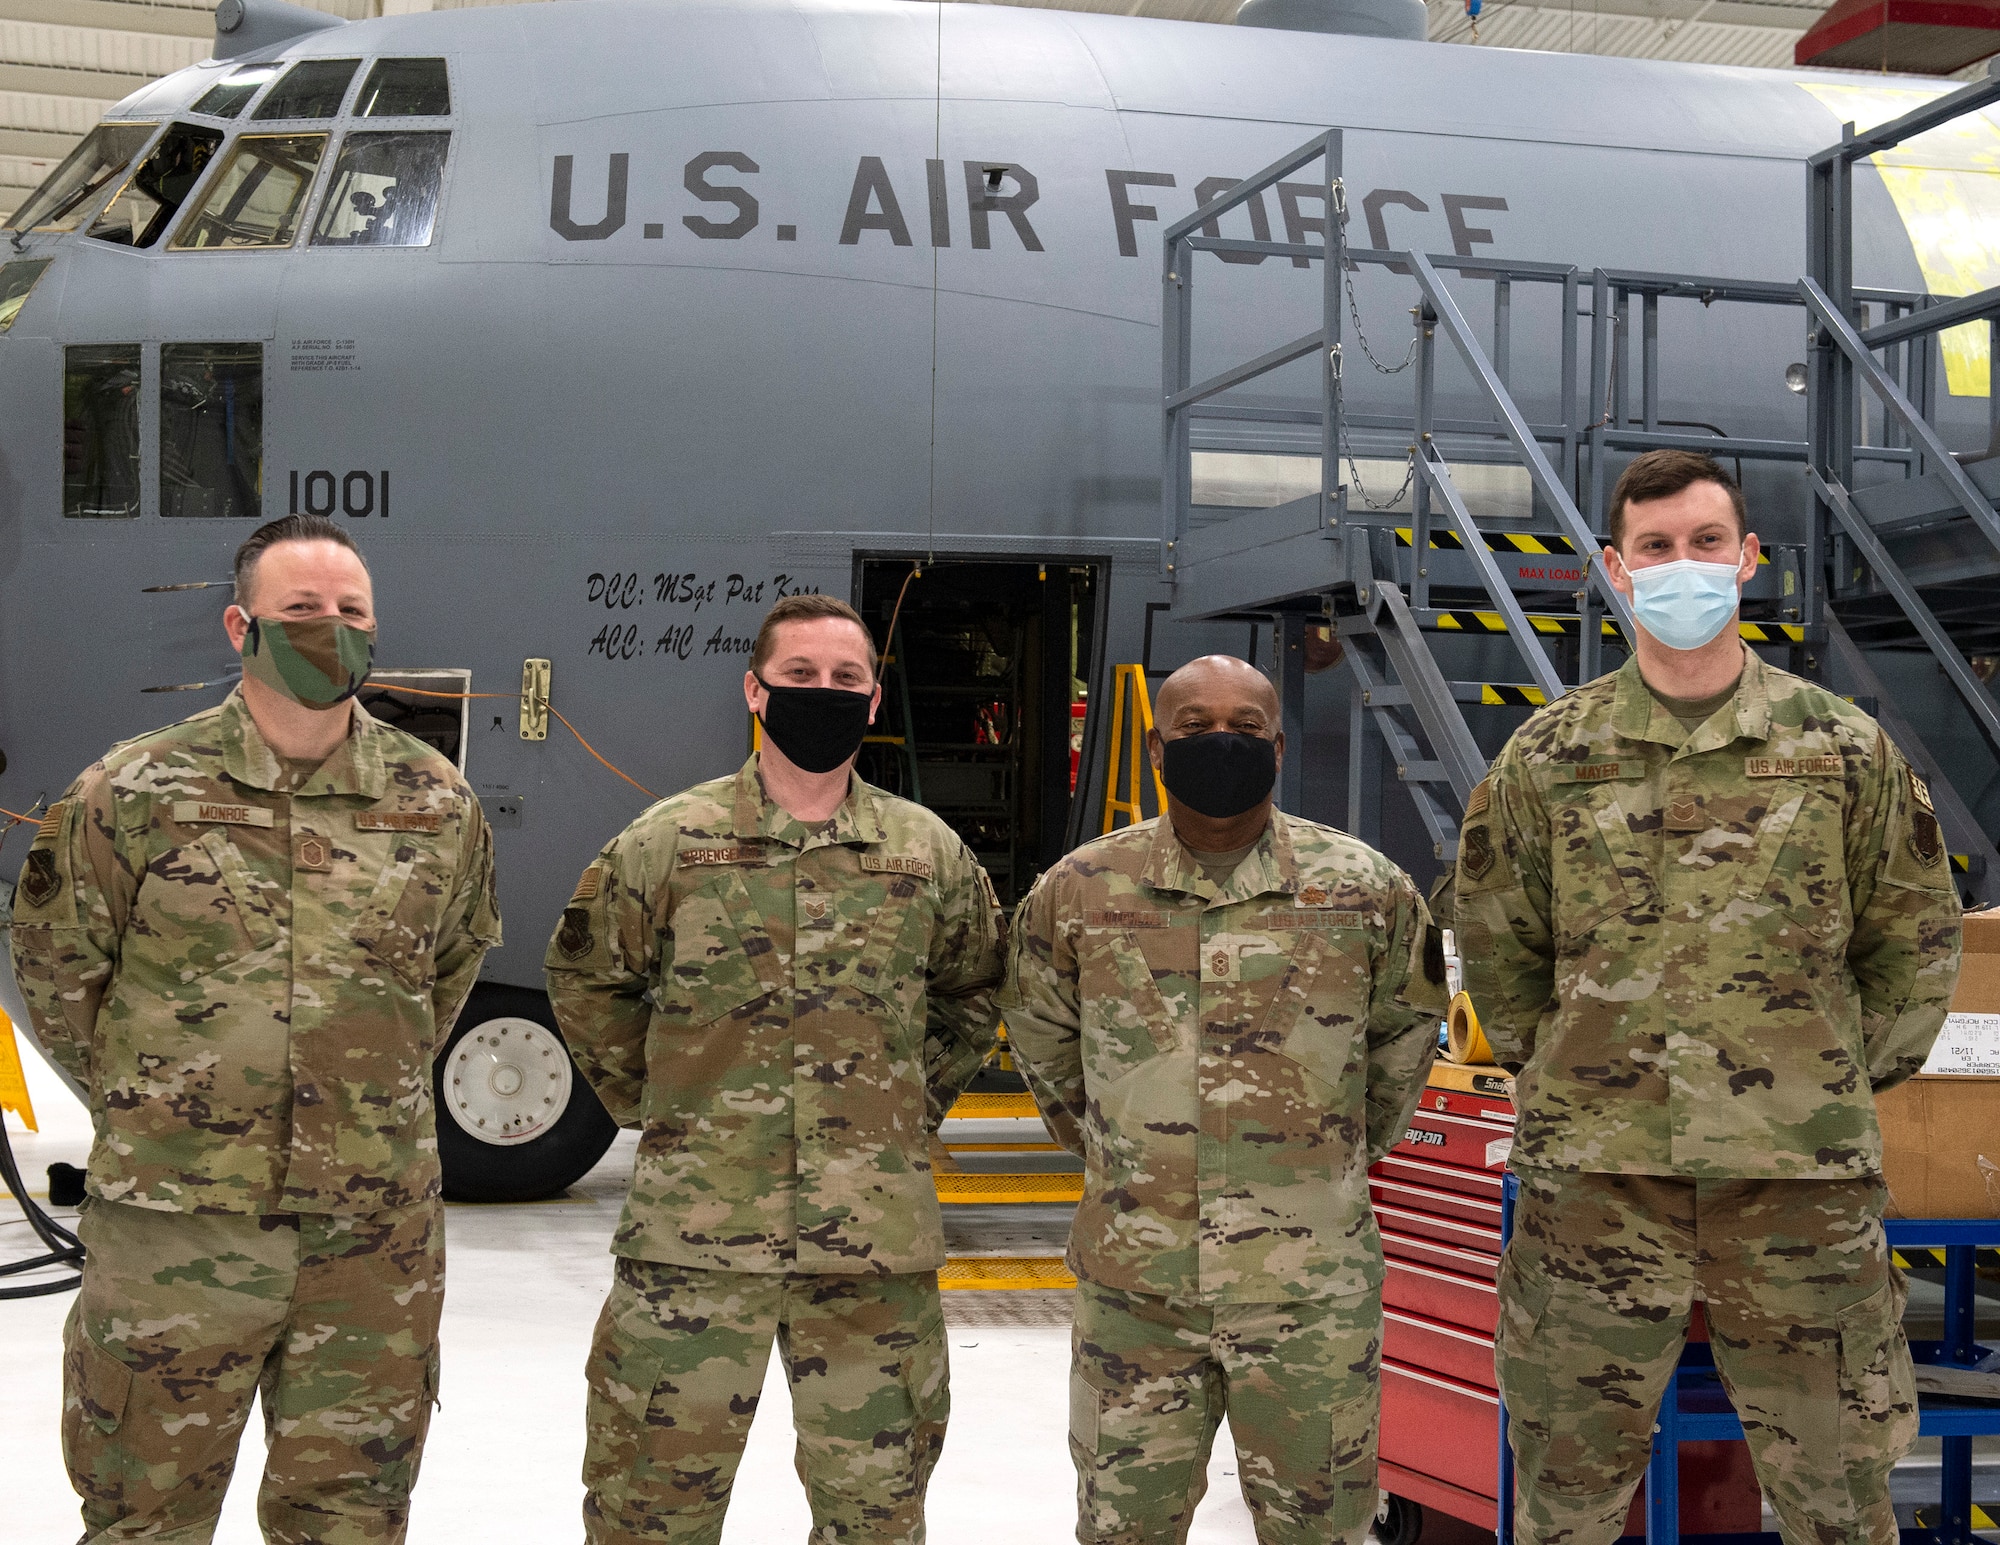 U.S. Air Force Airmen from the 133rd Maintenance Group, pose of a photograph with Senior Enlisted Advisor Tony L. Whitehead, senior enlisted advisor to the chief, National Guard Bureau in St. Paul, Minn., Feb. 16, 2022.